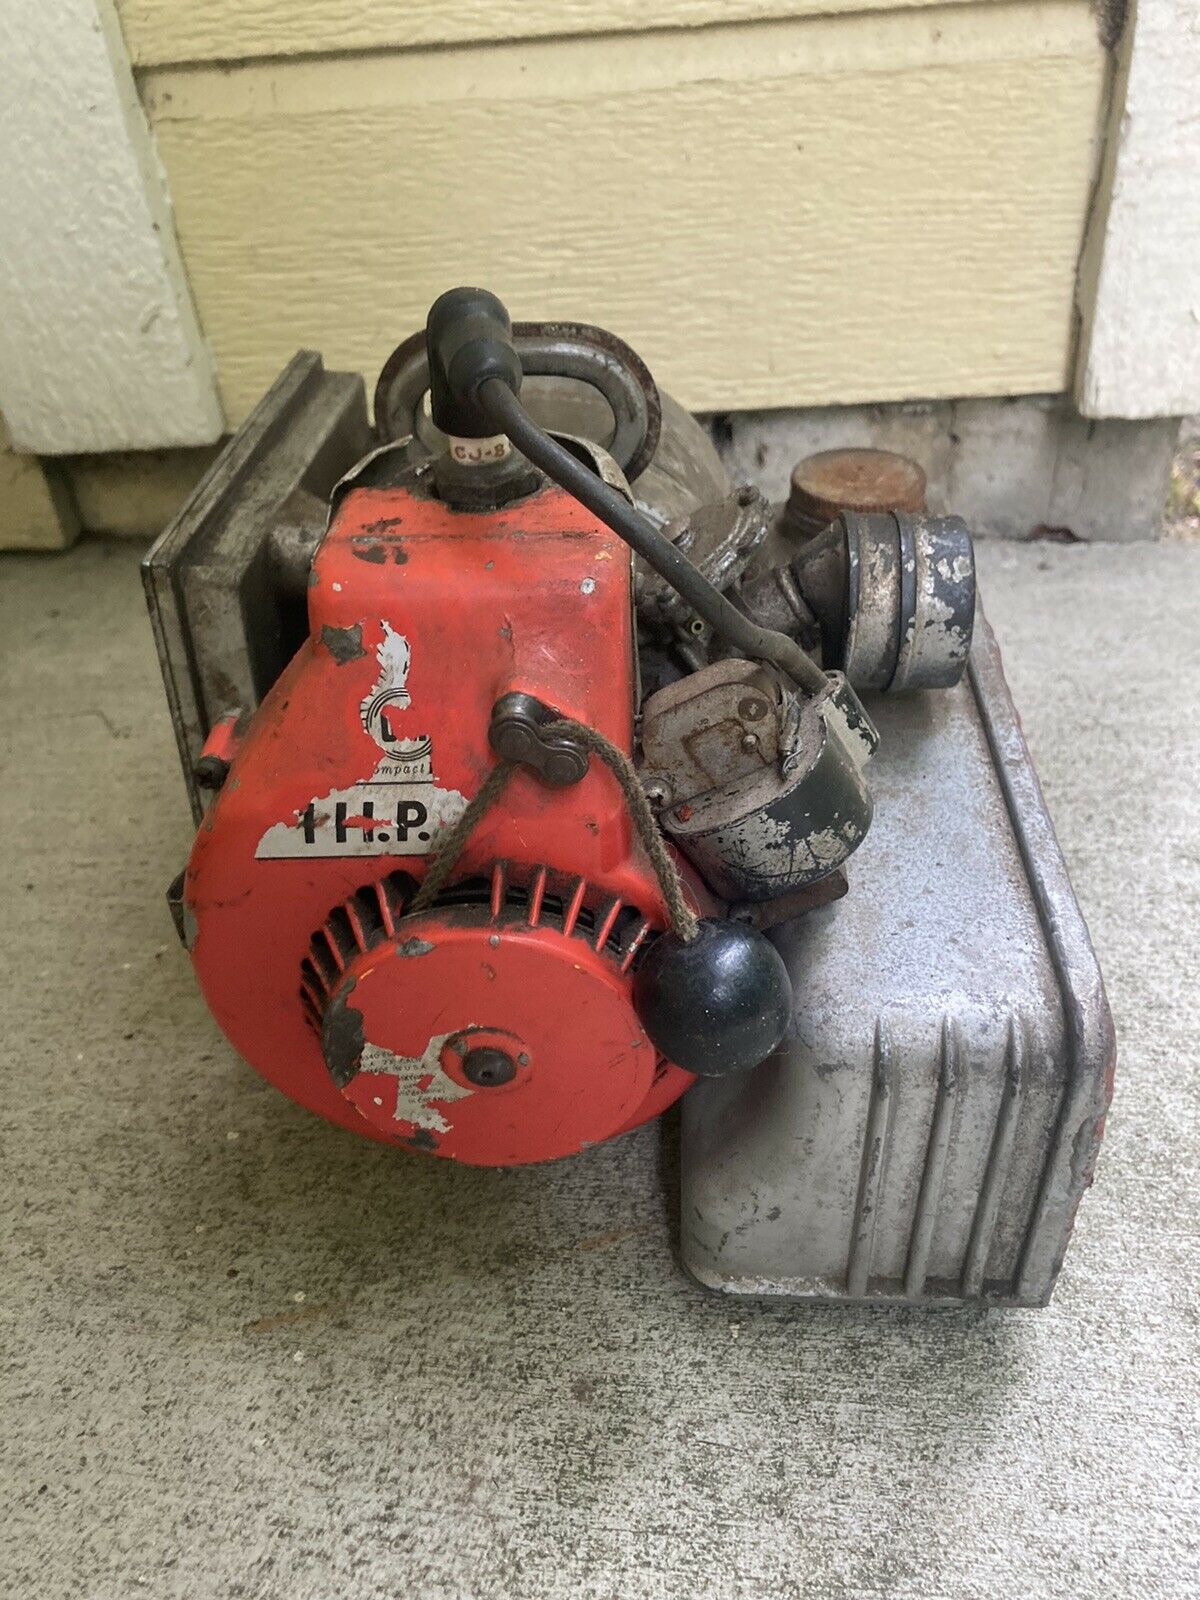 Ohlsson Rice Vintage Tiny Tiger Generator Has Compression Not Running 1 Hp Rare